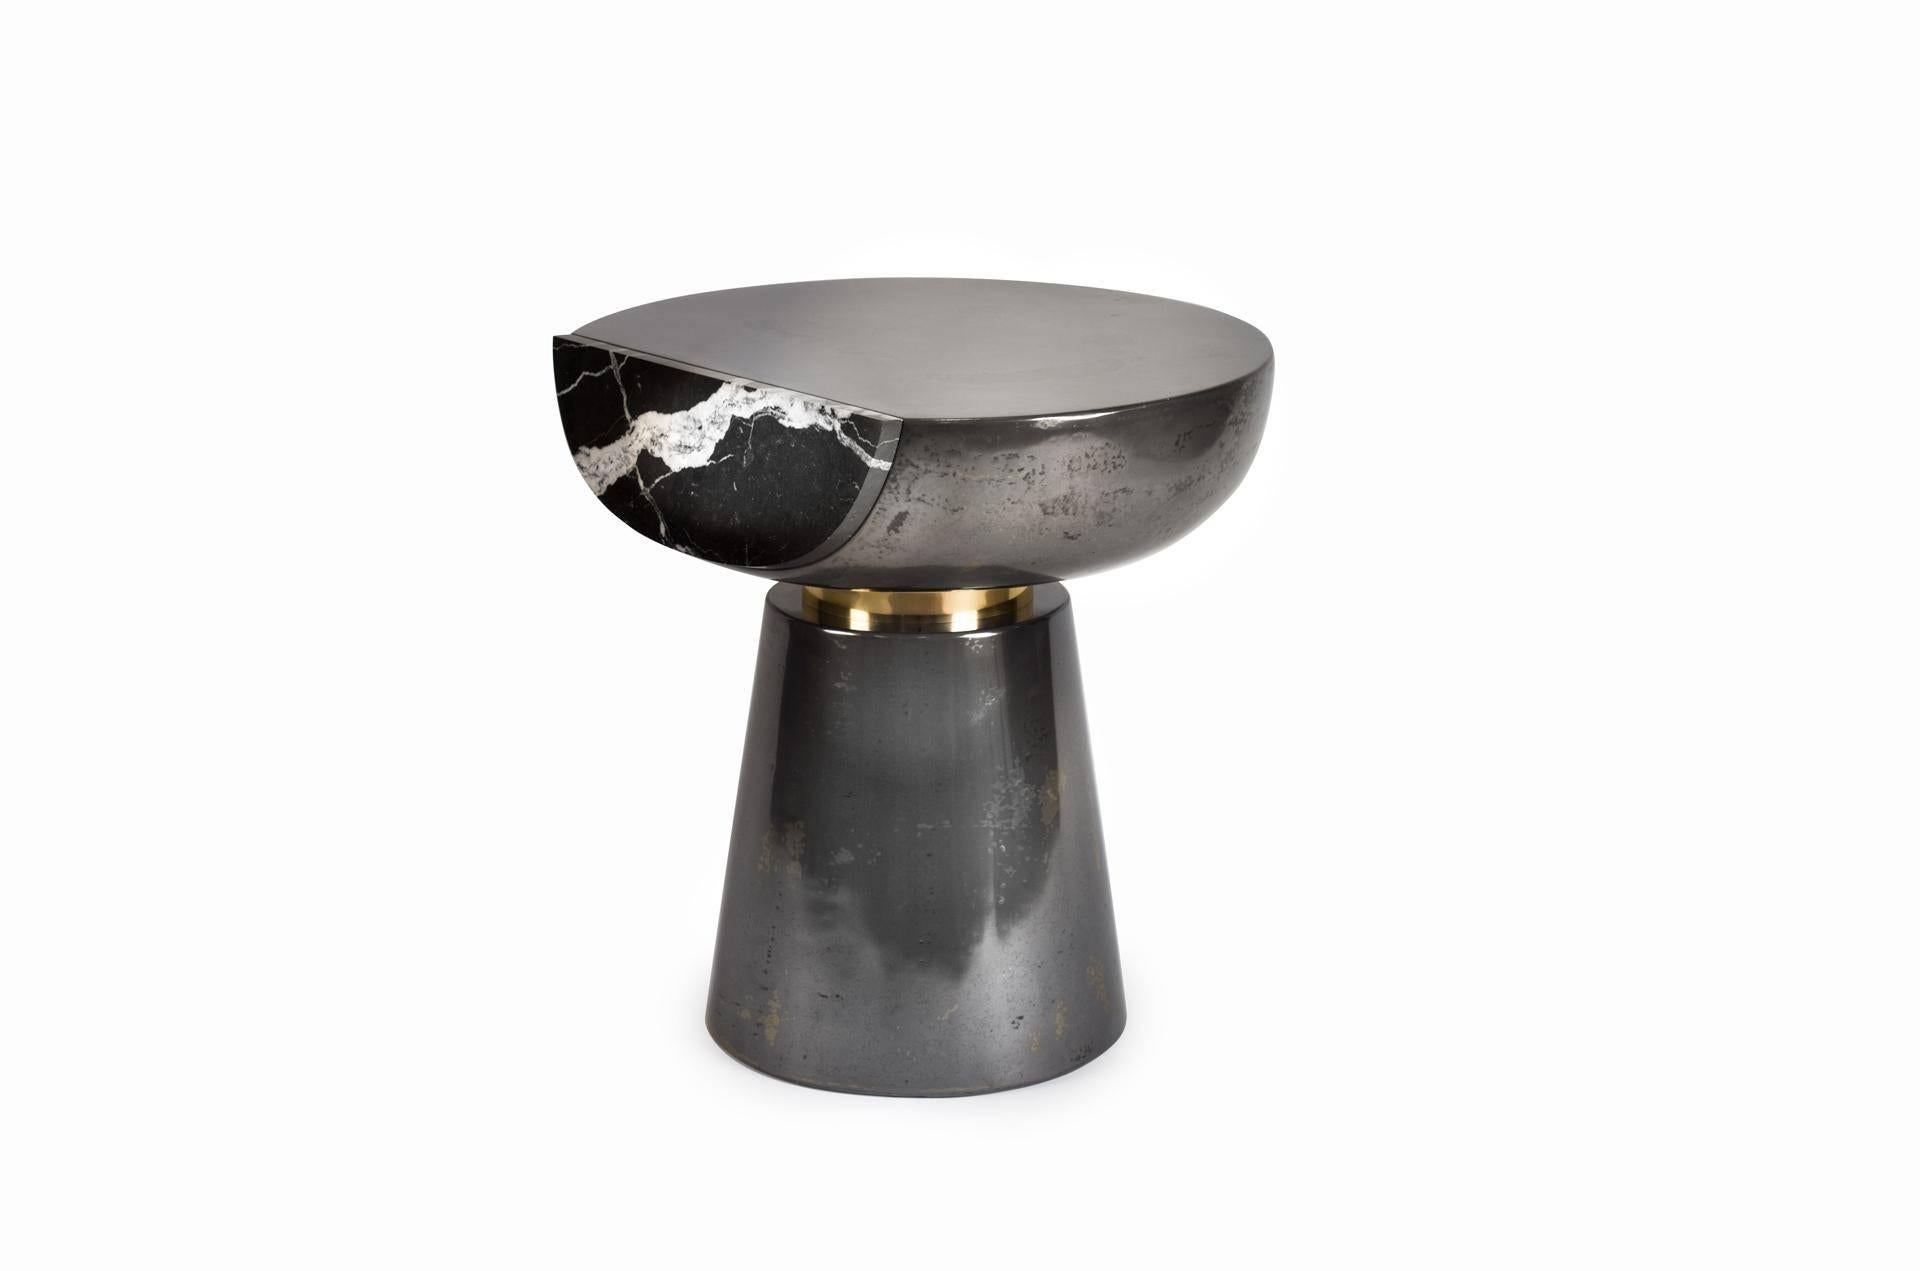 Handcrafted in the designer's workshop studio, the Ya Yo table is a perfect blend of cocktail table and collectible art design piece.
